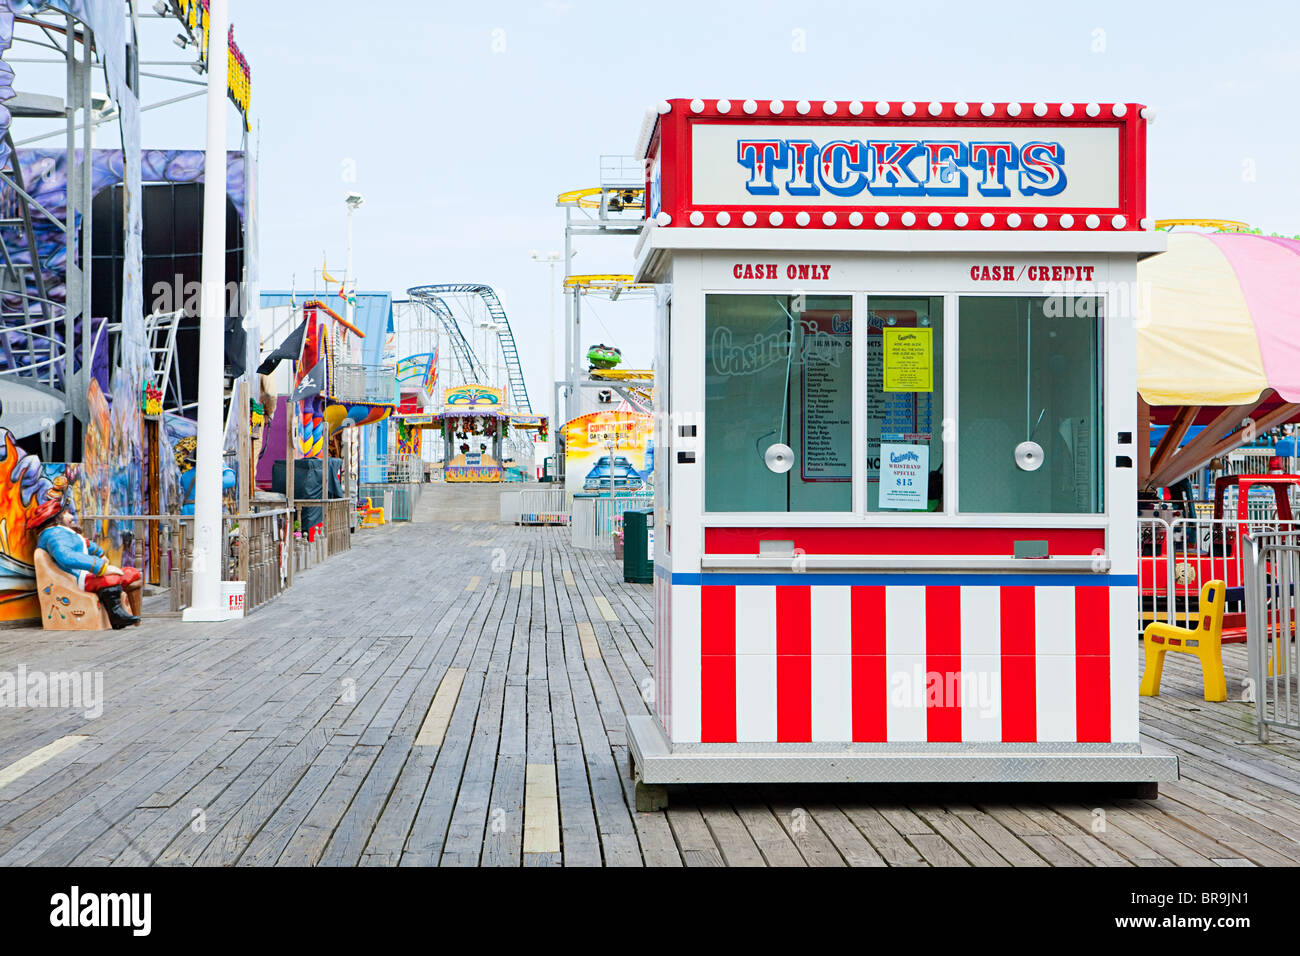 Ticket booth on boardwalk at seaside heights, new jersey Stock Photo